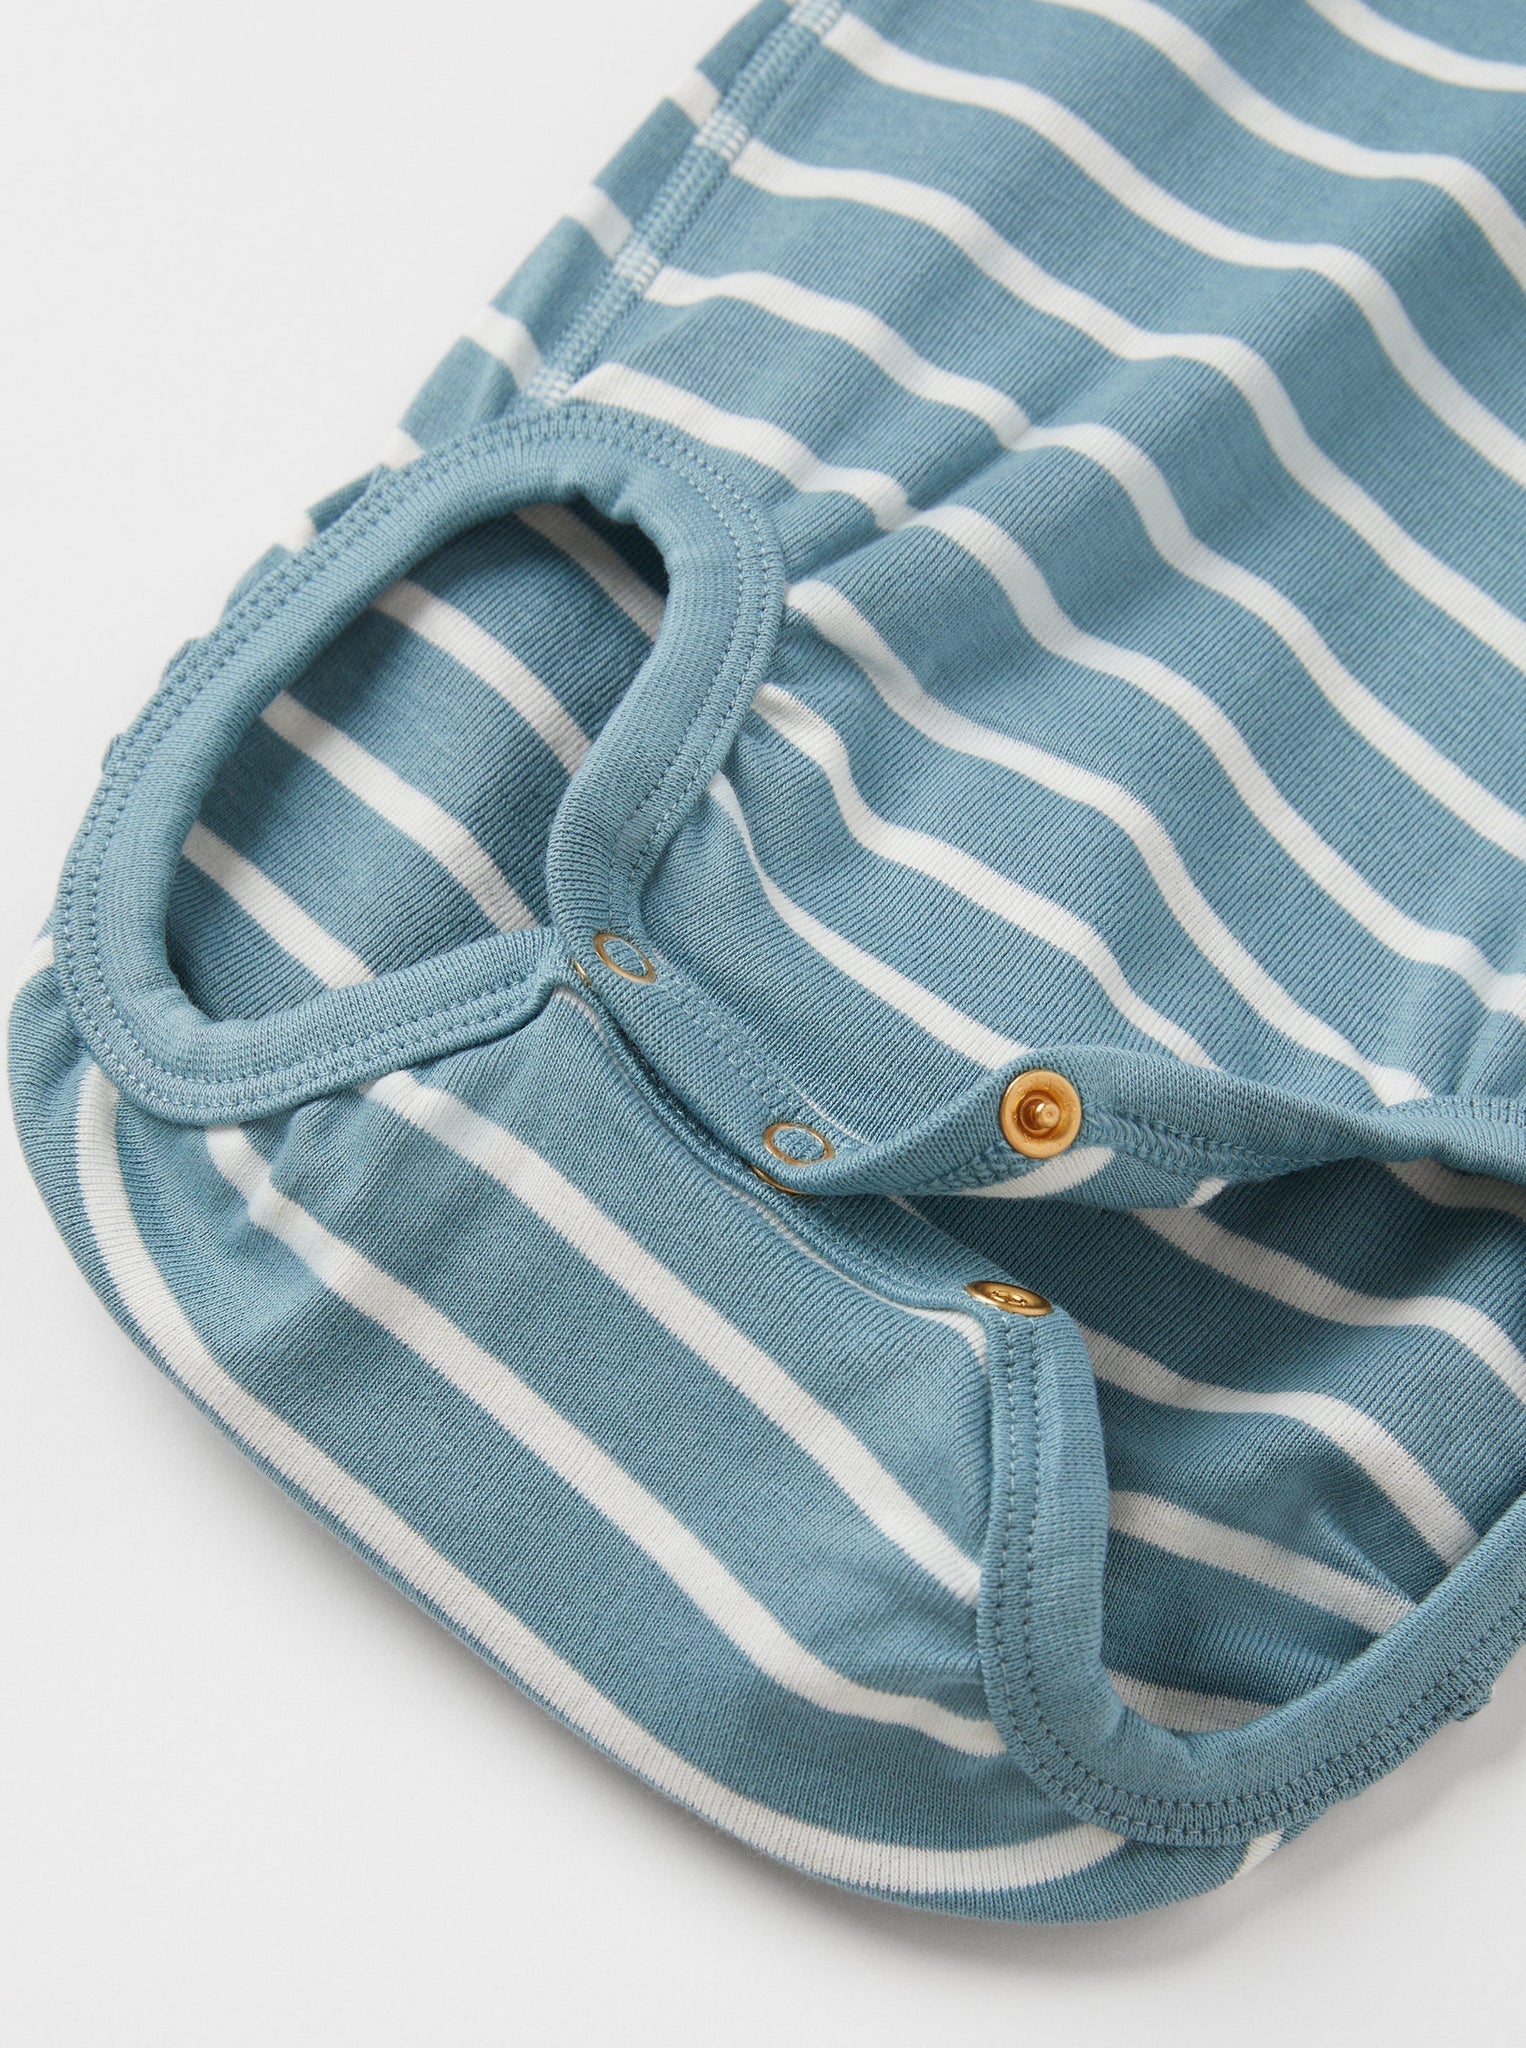 Striped Organic Cotton Blue Babygrow from the Polarn O. Pyret babywear collection. Nordic baby clothes made from sustainable sources.